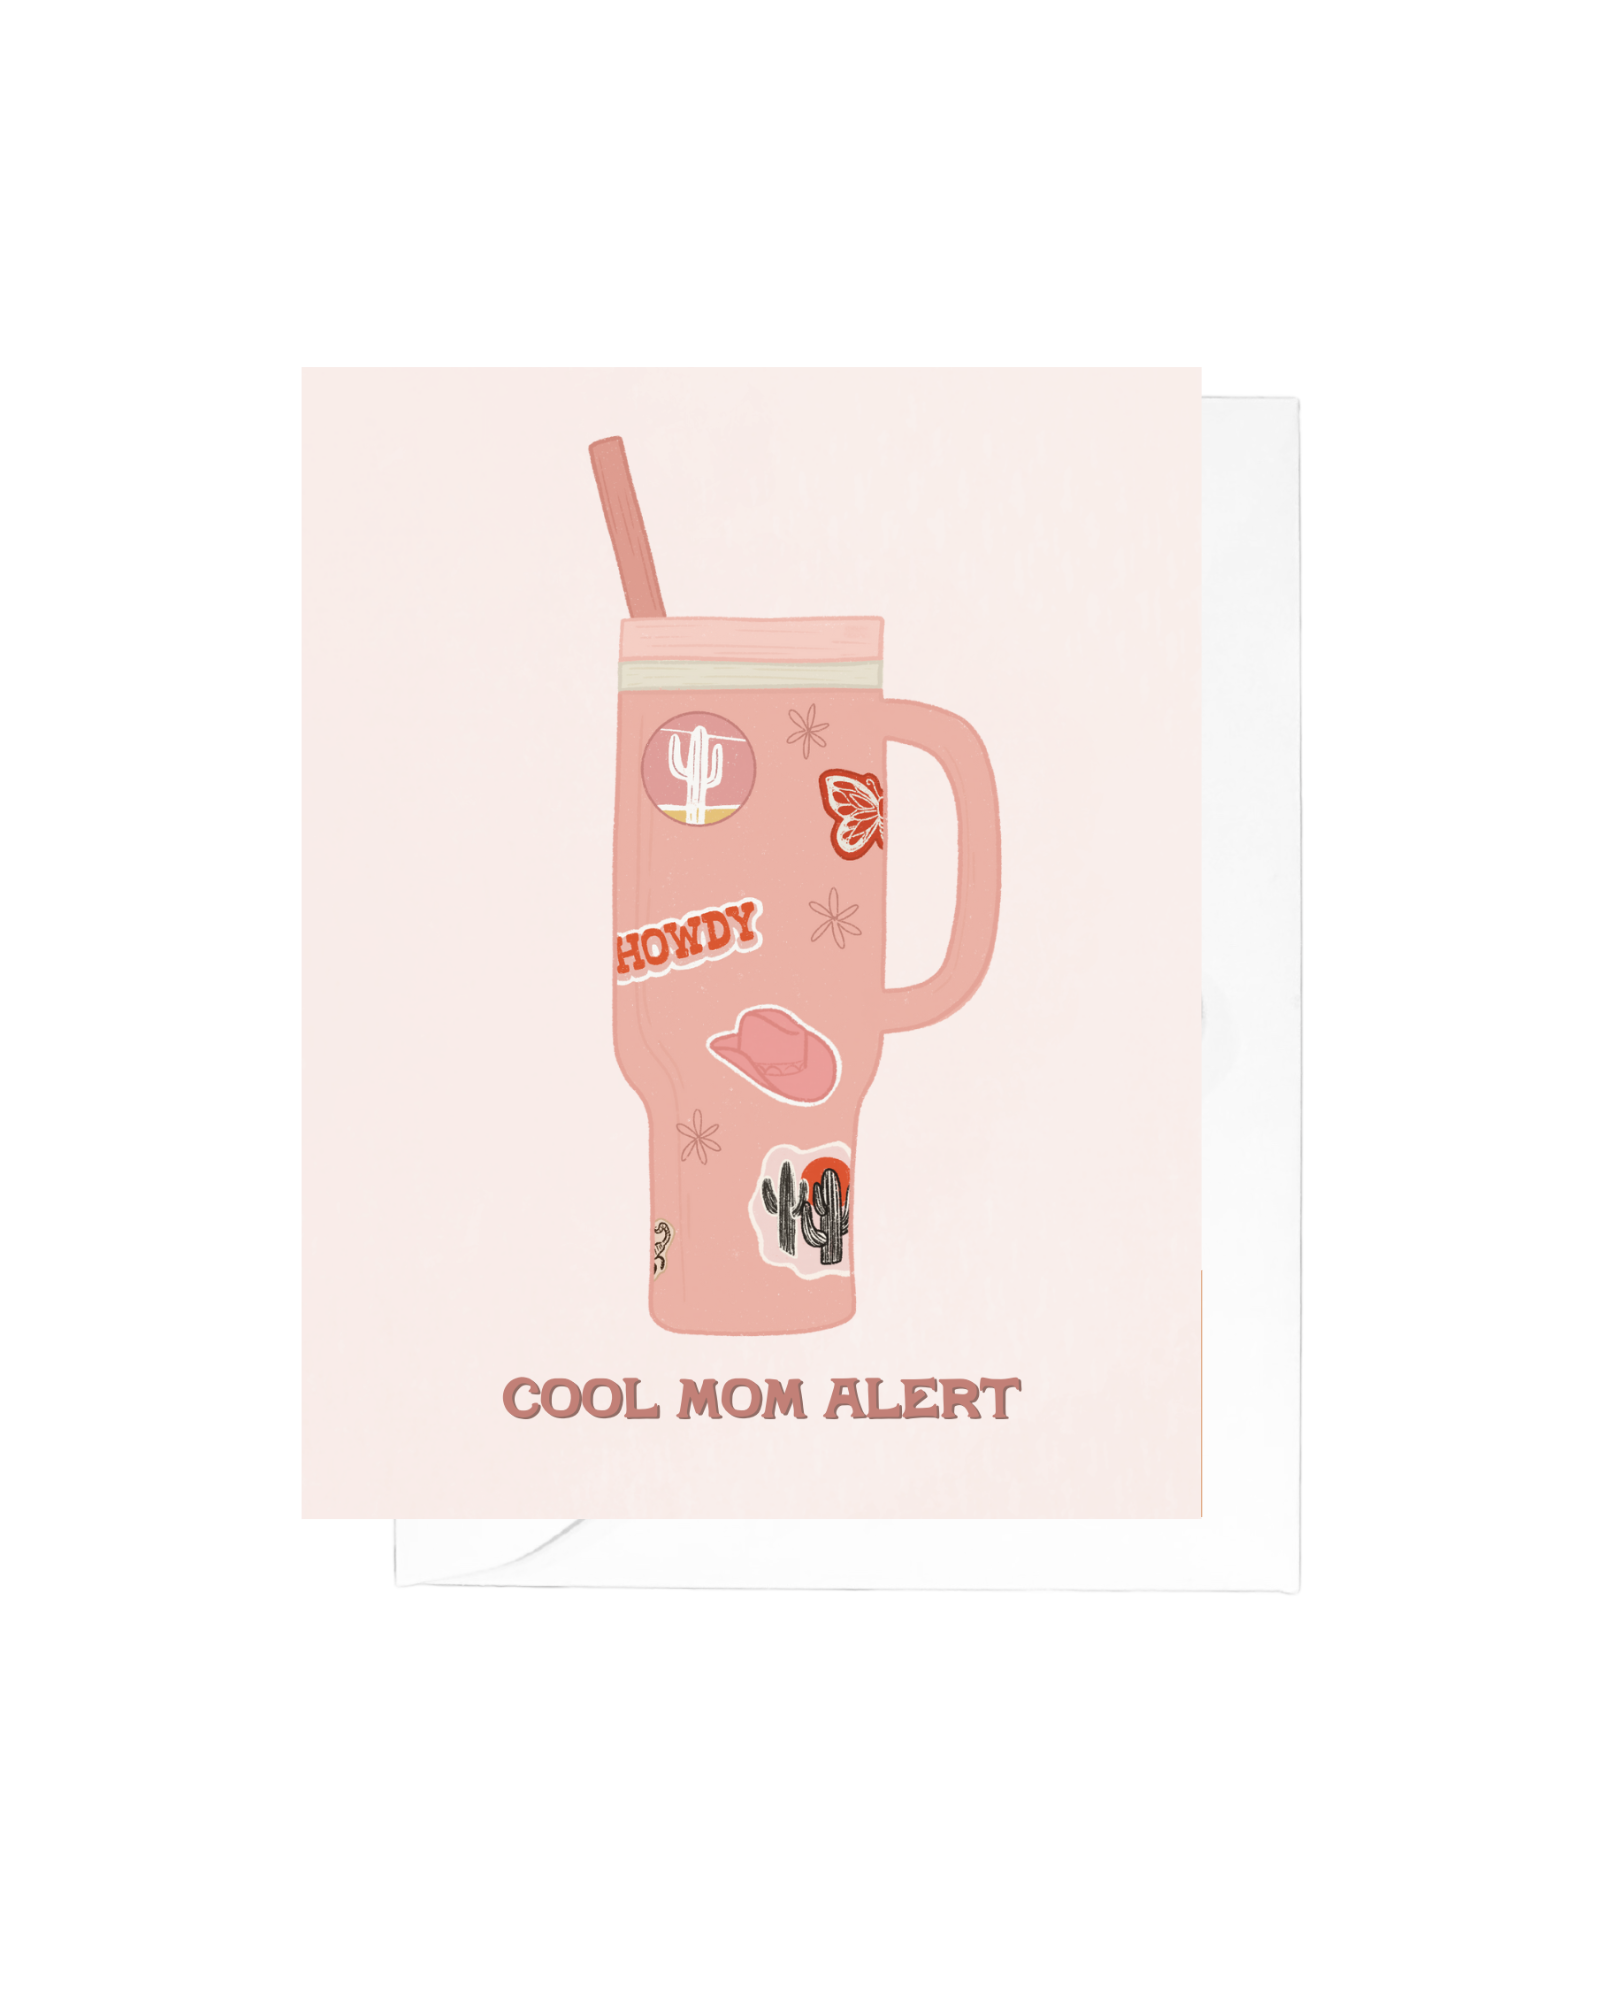 Greeting card with an illustration of a water bottle with a handle and several stickers with the text "cool mom alert" below the cup